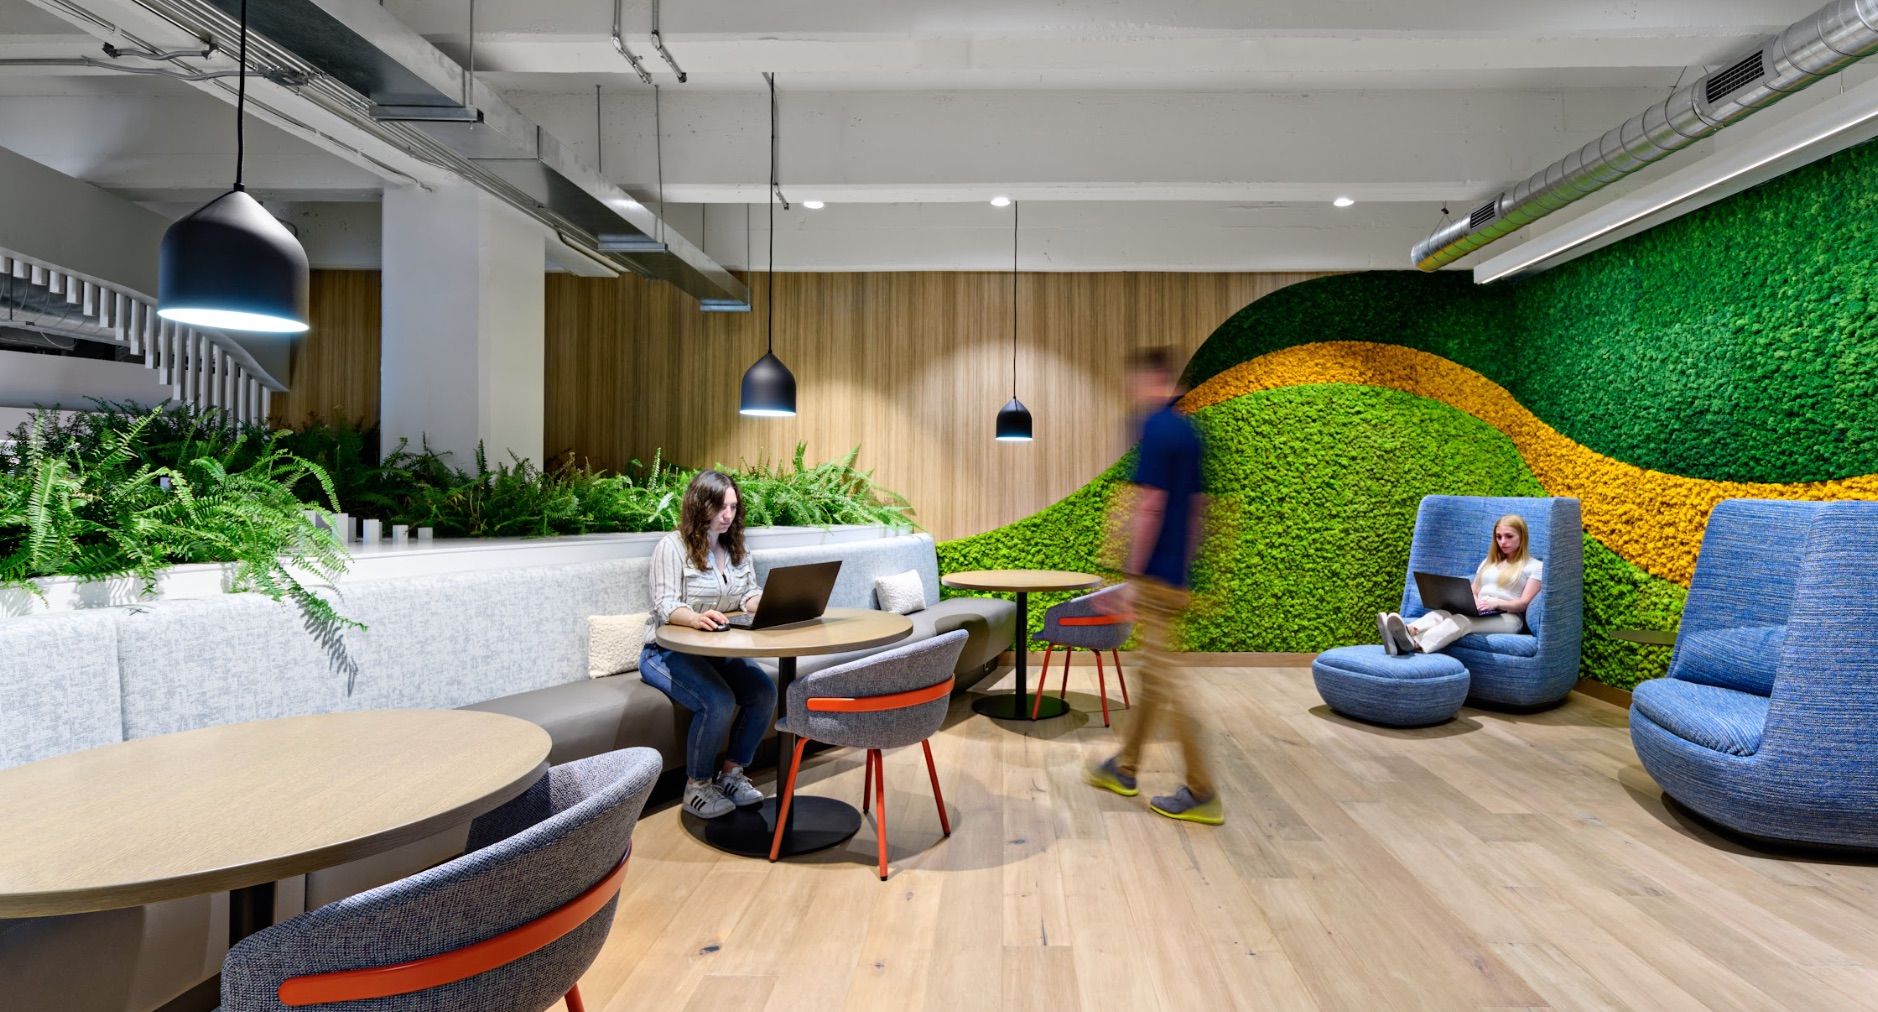 “The Retreat” in the San Francisco Cloudflare office, featuring preserved moss and live plants